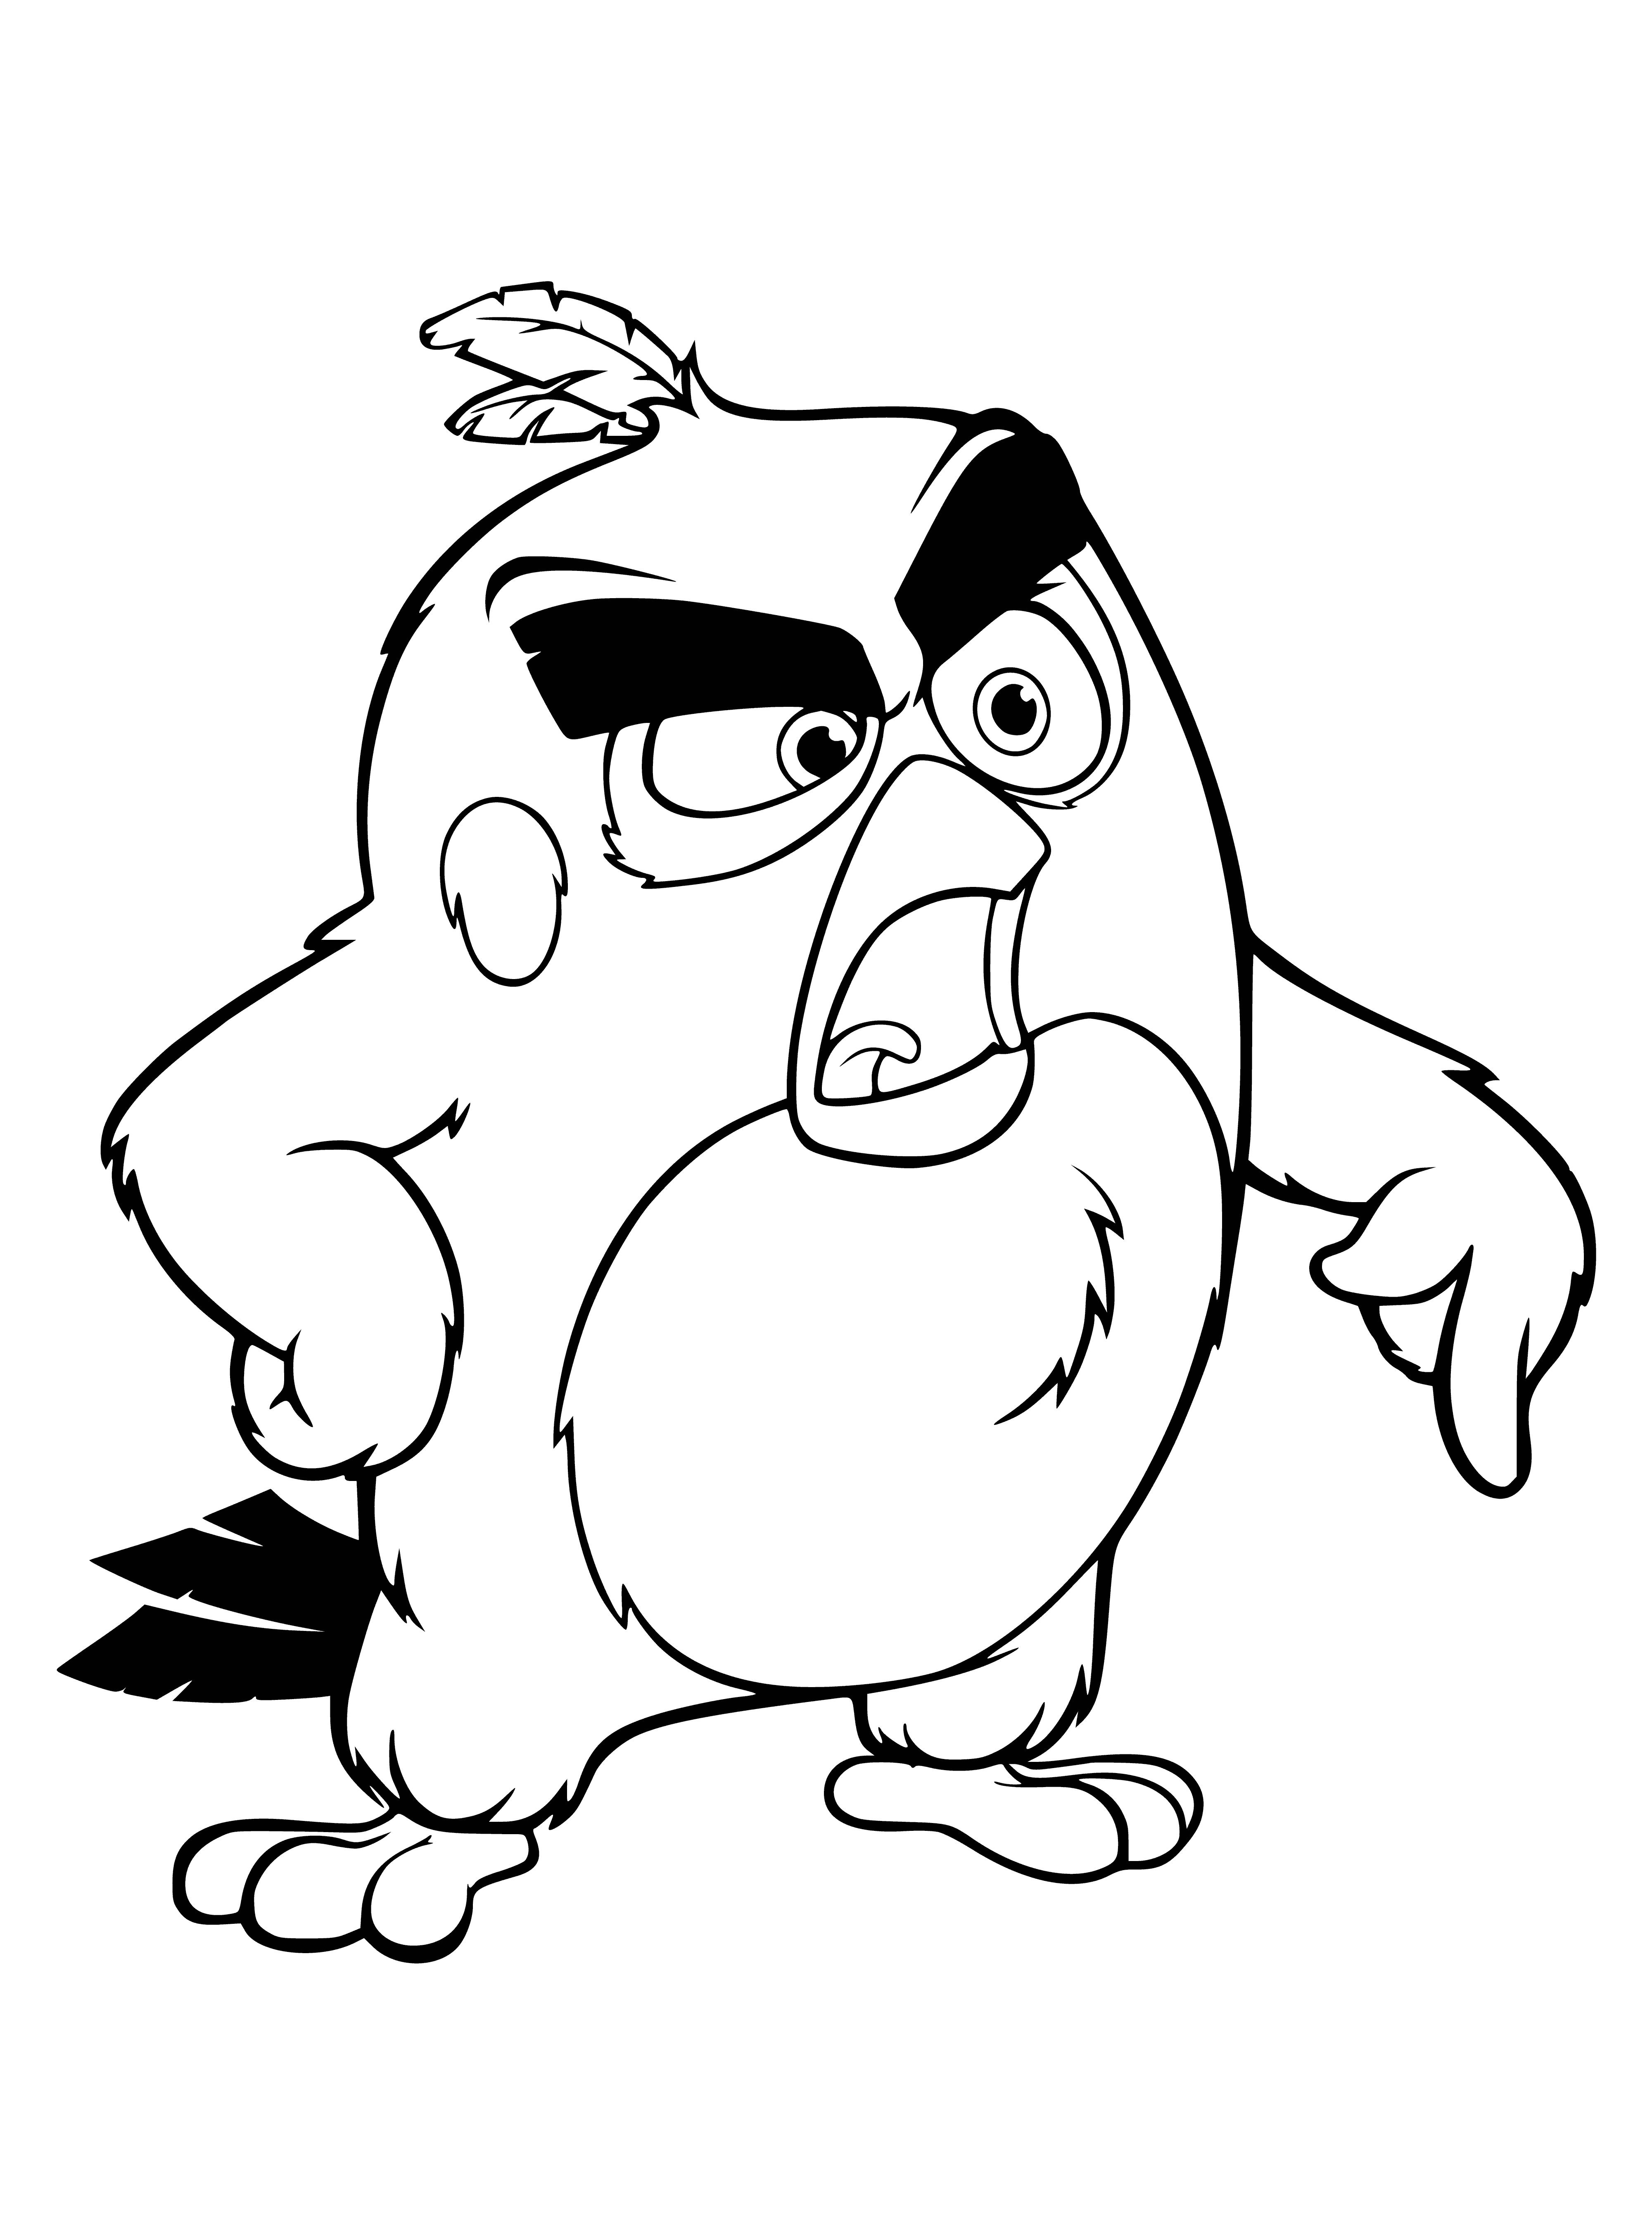 coloring page: Players must use a slingshot to control an Angry Bird and destroy buildings. Skill and accuracy are needed to beat the game. #AngryBirds #Gaming